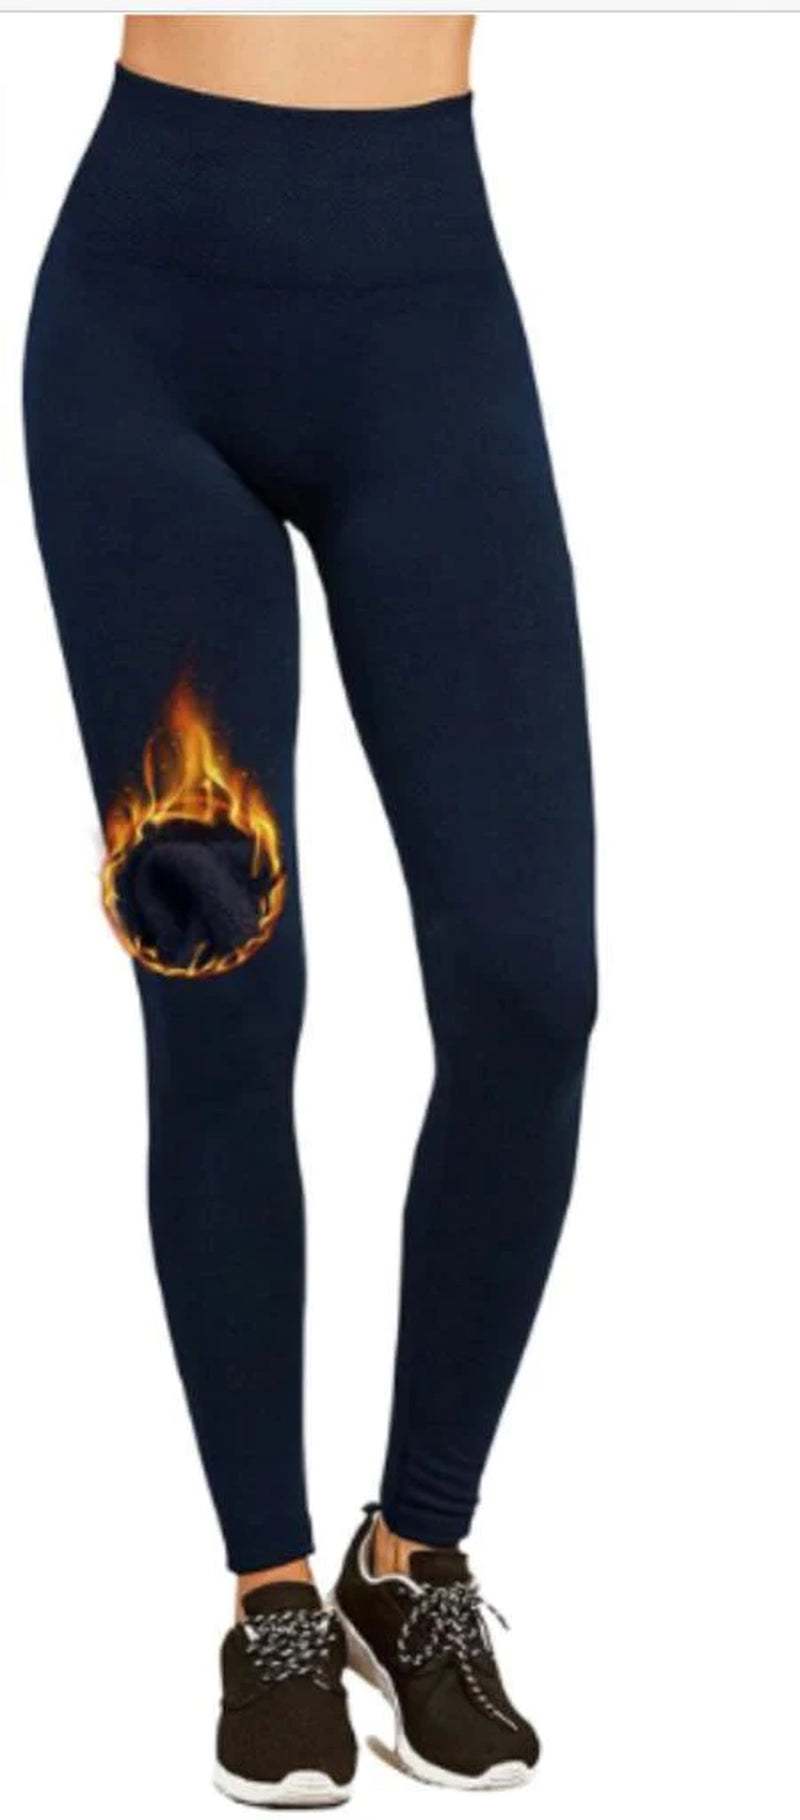 PBG Women's Fleece Leggings - Assorted Colors, High Waist, Stretchy, and Warm - One Size (Recommended for Small-Large)